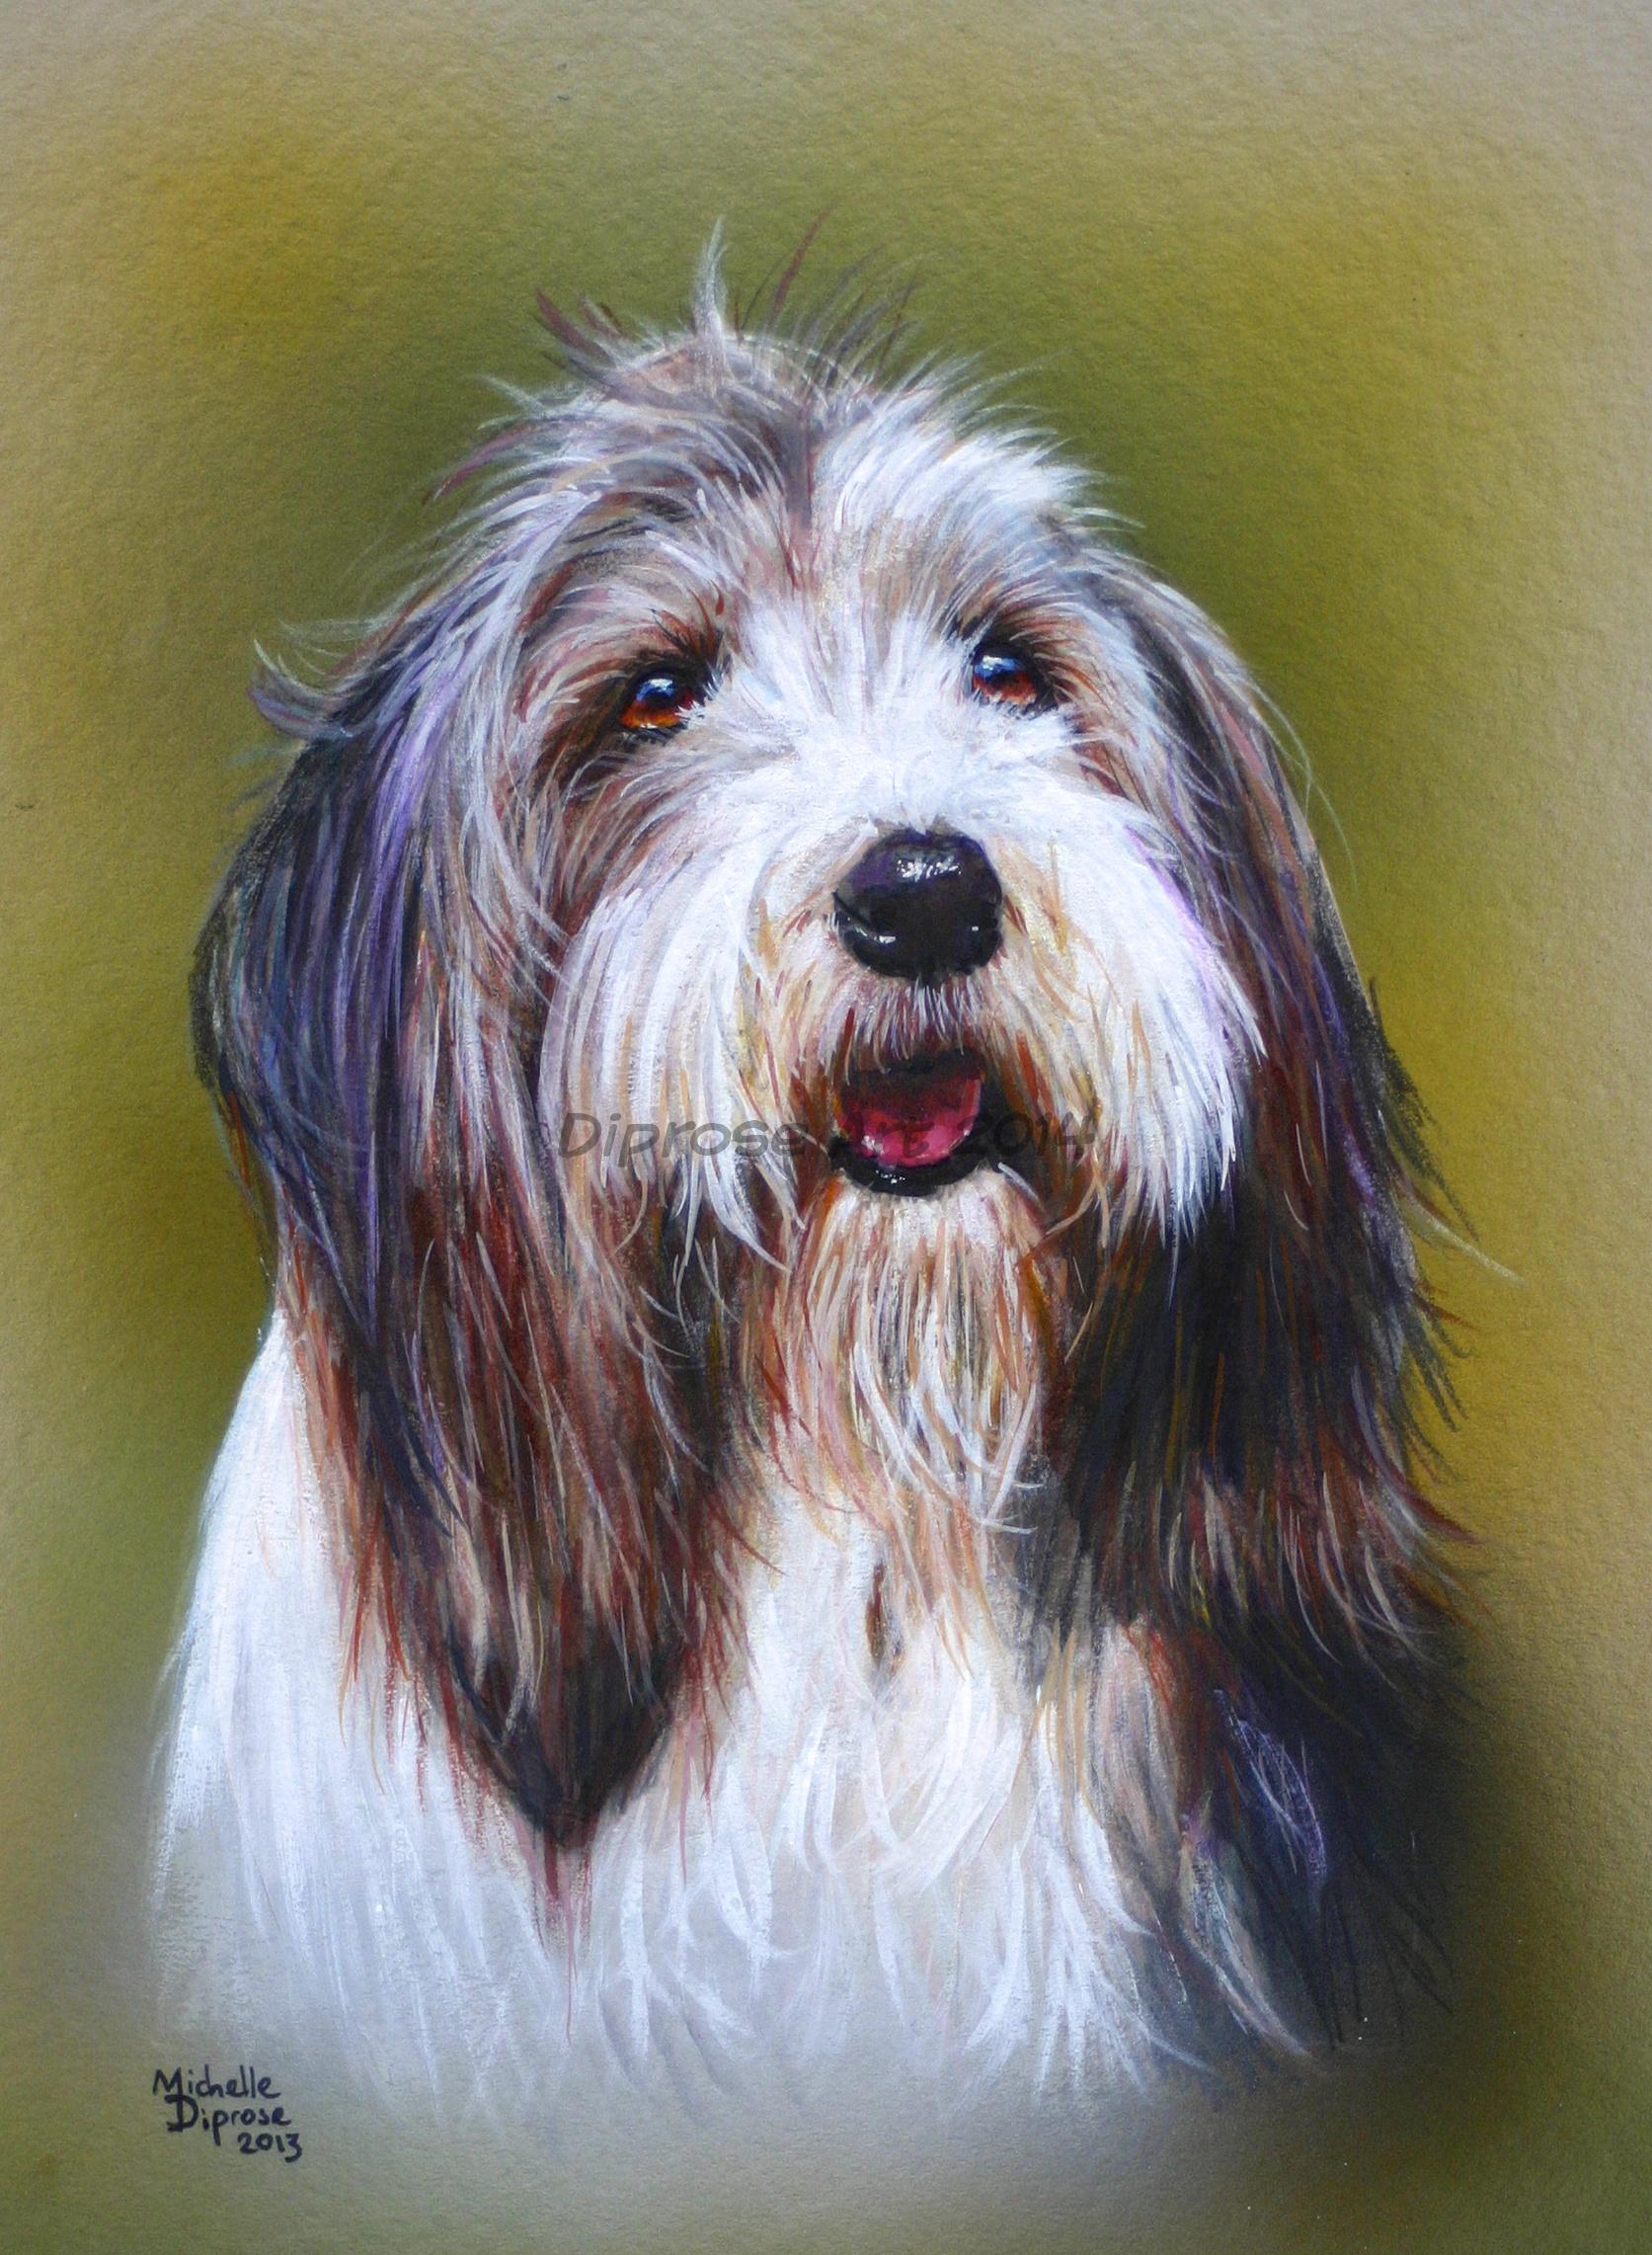 Acrylics on board - approx A4 - pet dog portrait - I loved this dog to bits - she was so much friendly fun.  I enjoyed photographing her as much as i did painting her.  Fantastic hair!